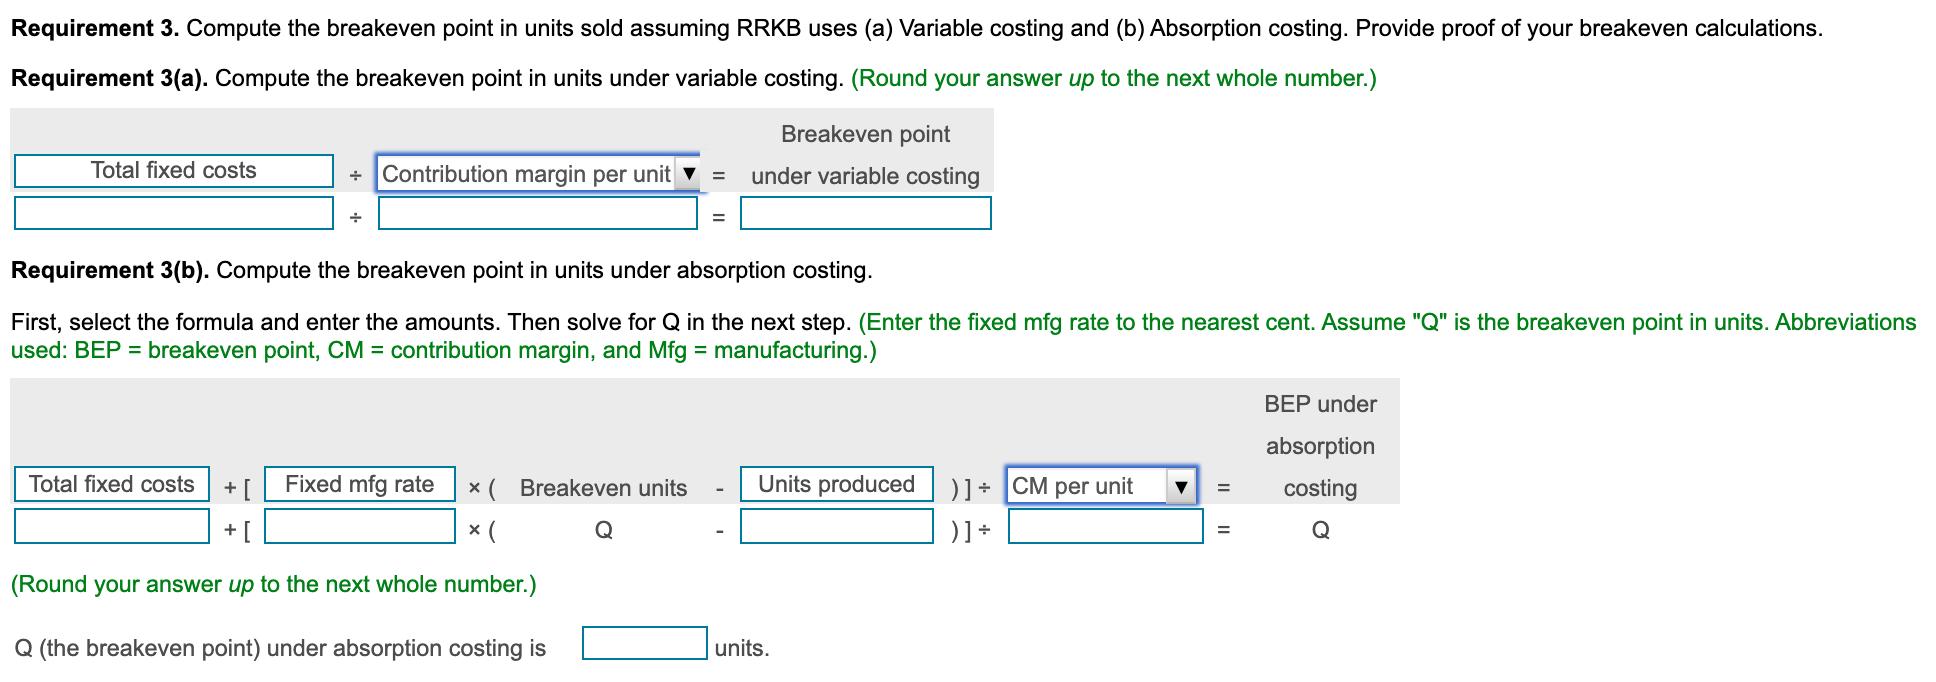 Requirement 3. Compute the breakeven point in units sold assuming RRKB uses (a) Variable costing and (b) Absorption costing.